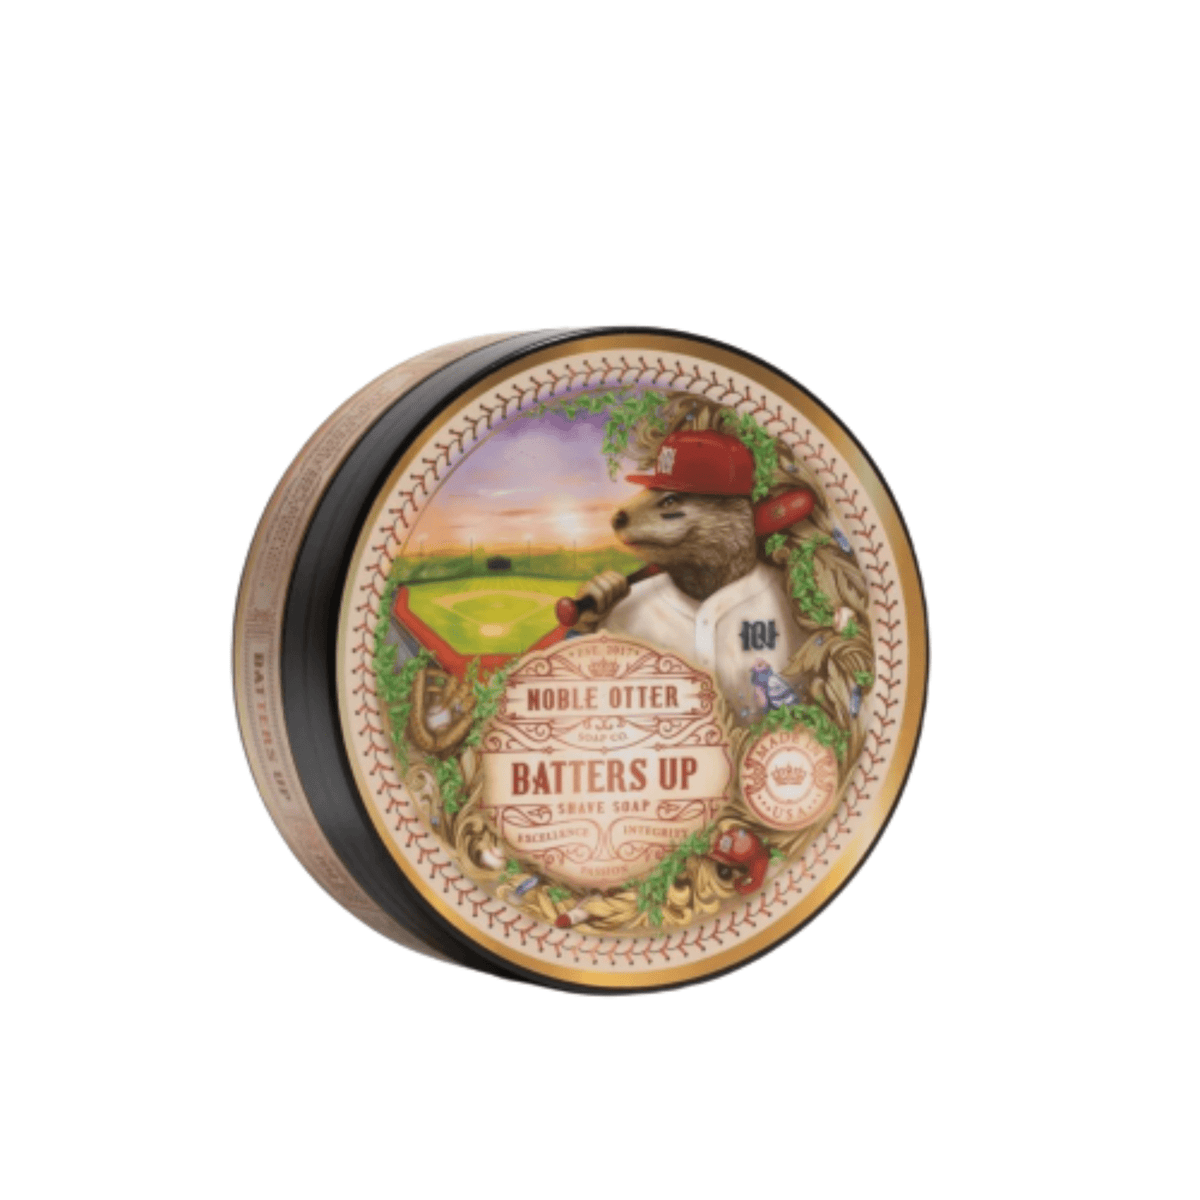 Primary Image of Batters Up Shave Soap